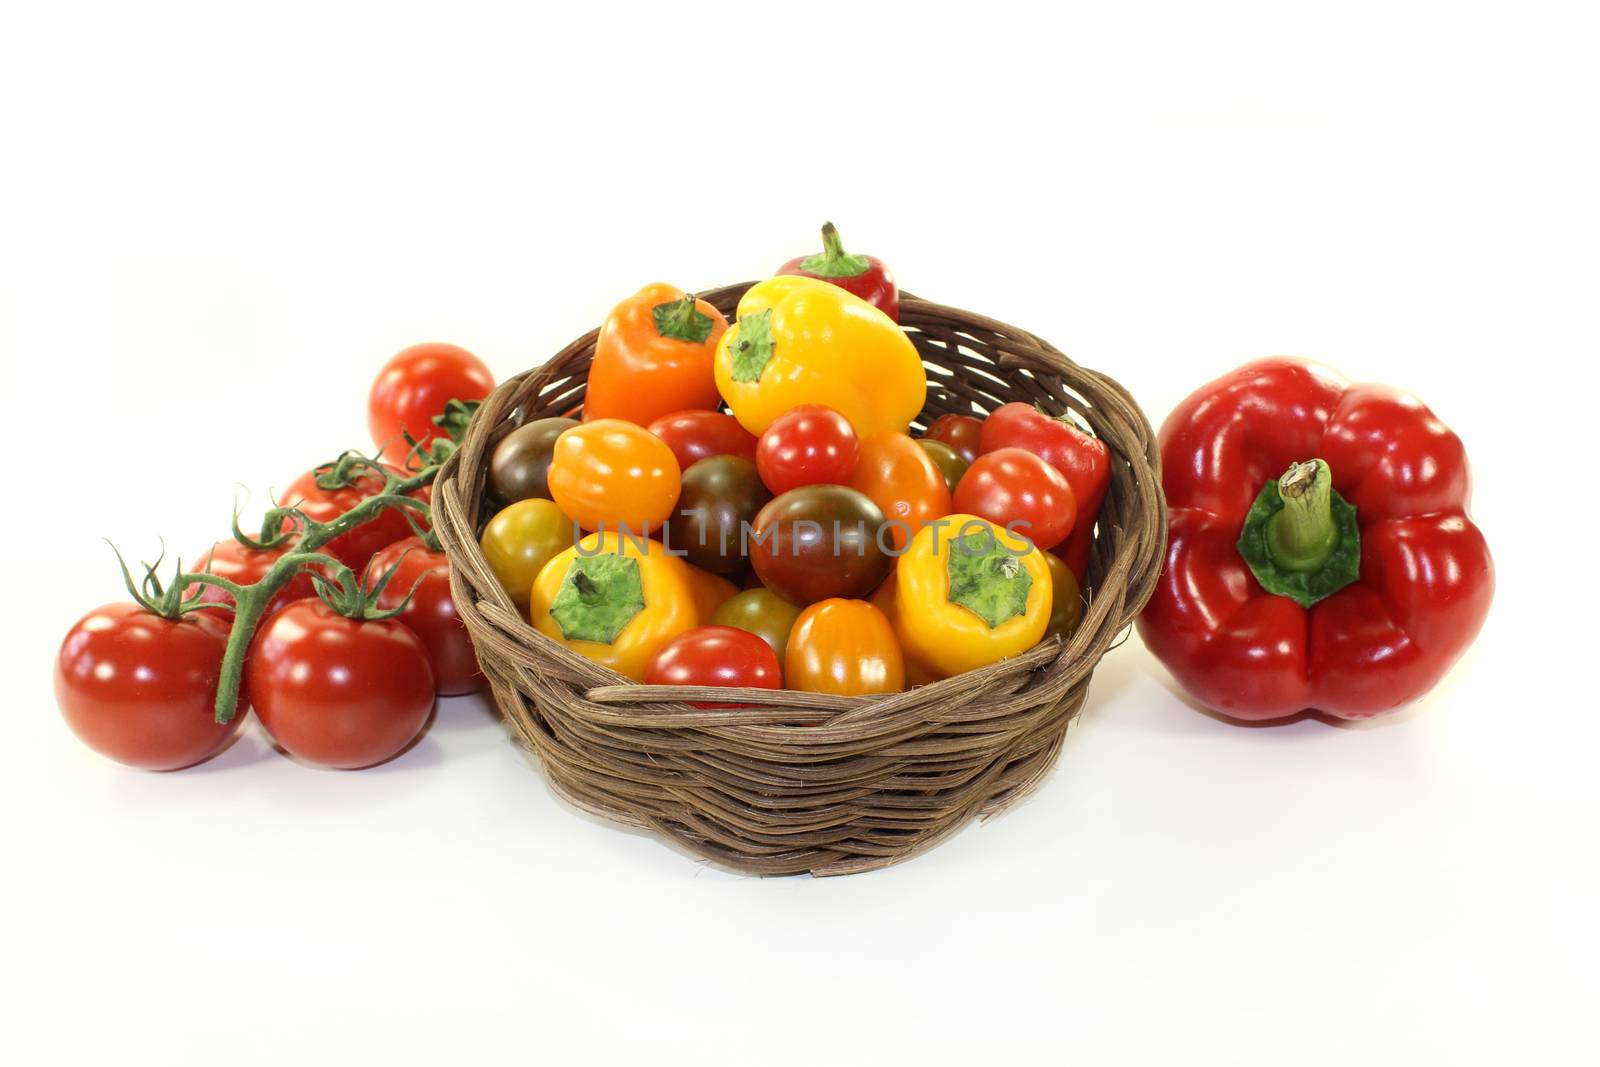 little tomatoes and peppers in a small basket